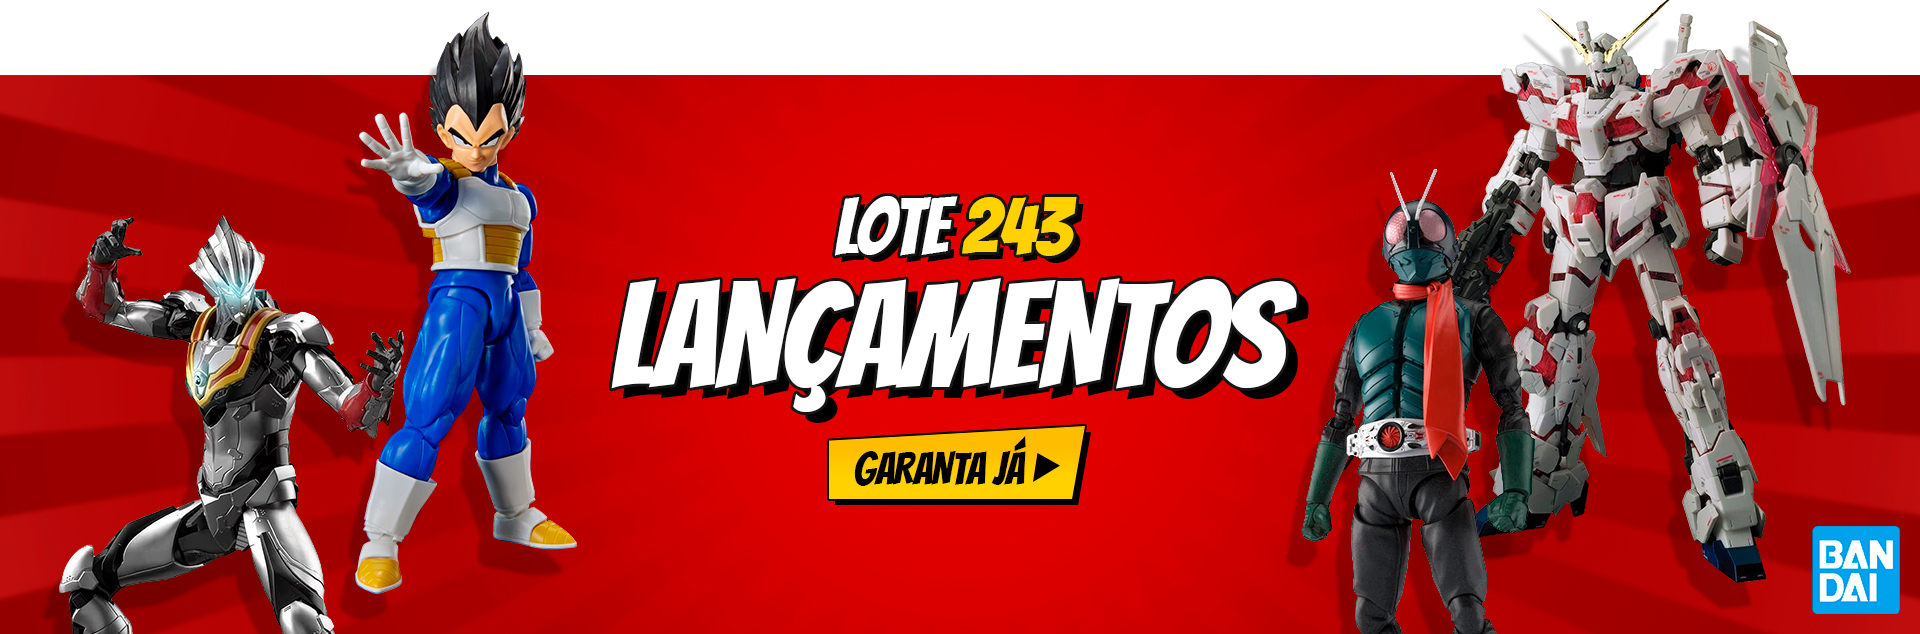 Lote 243